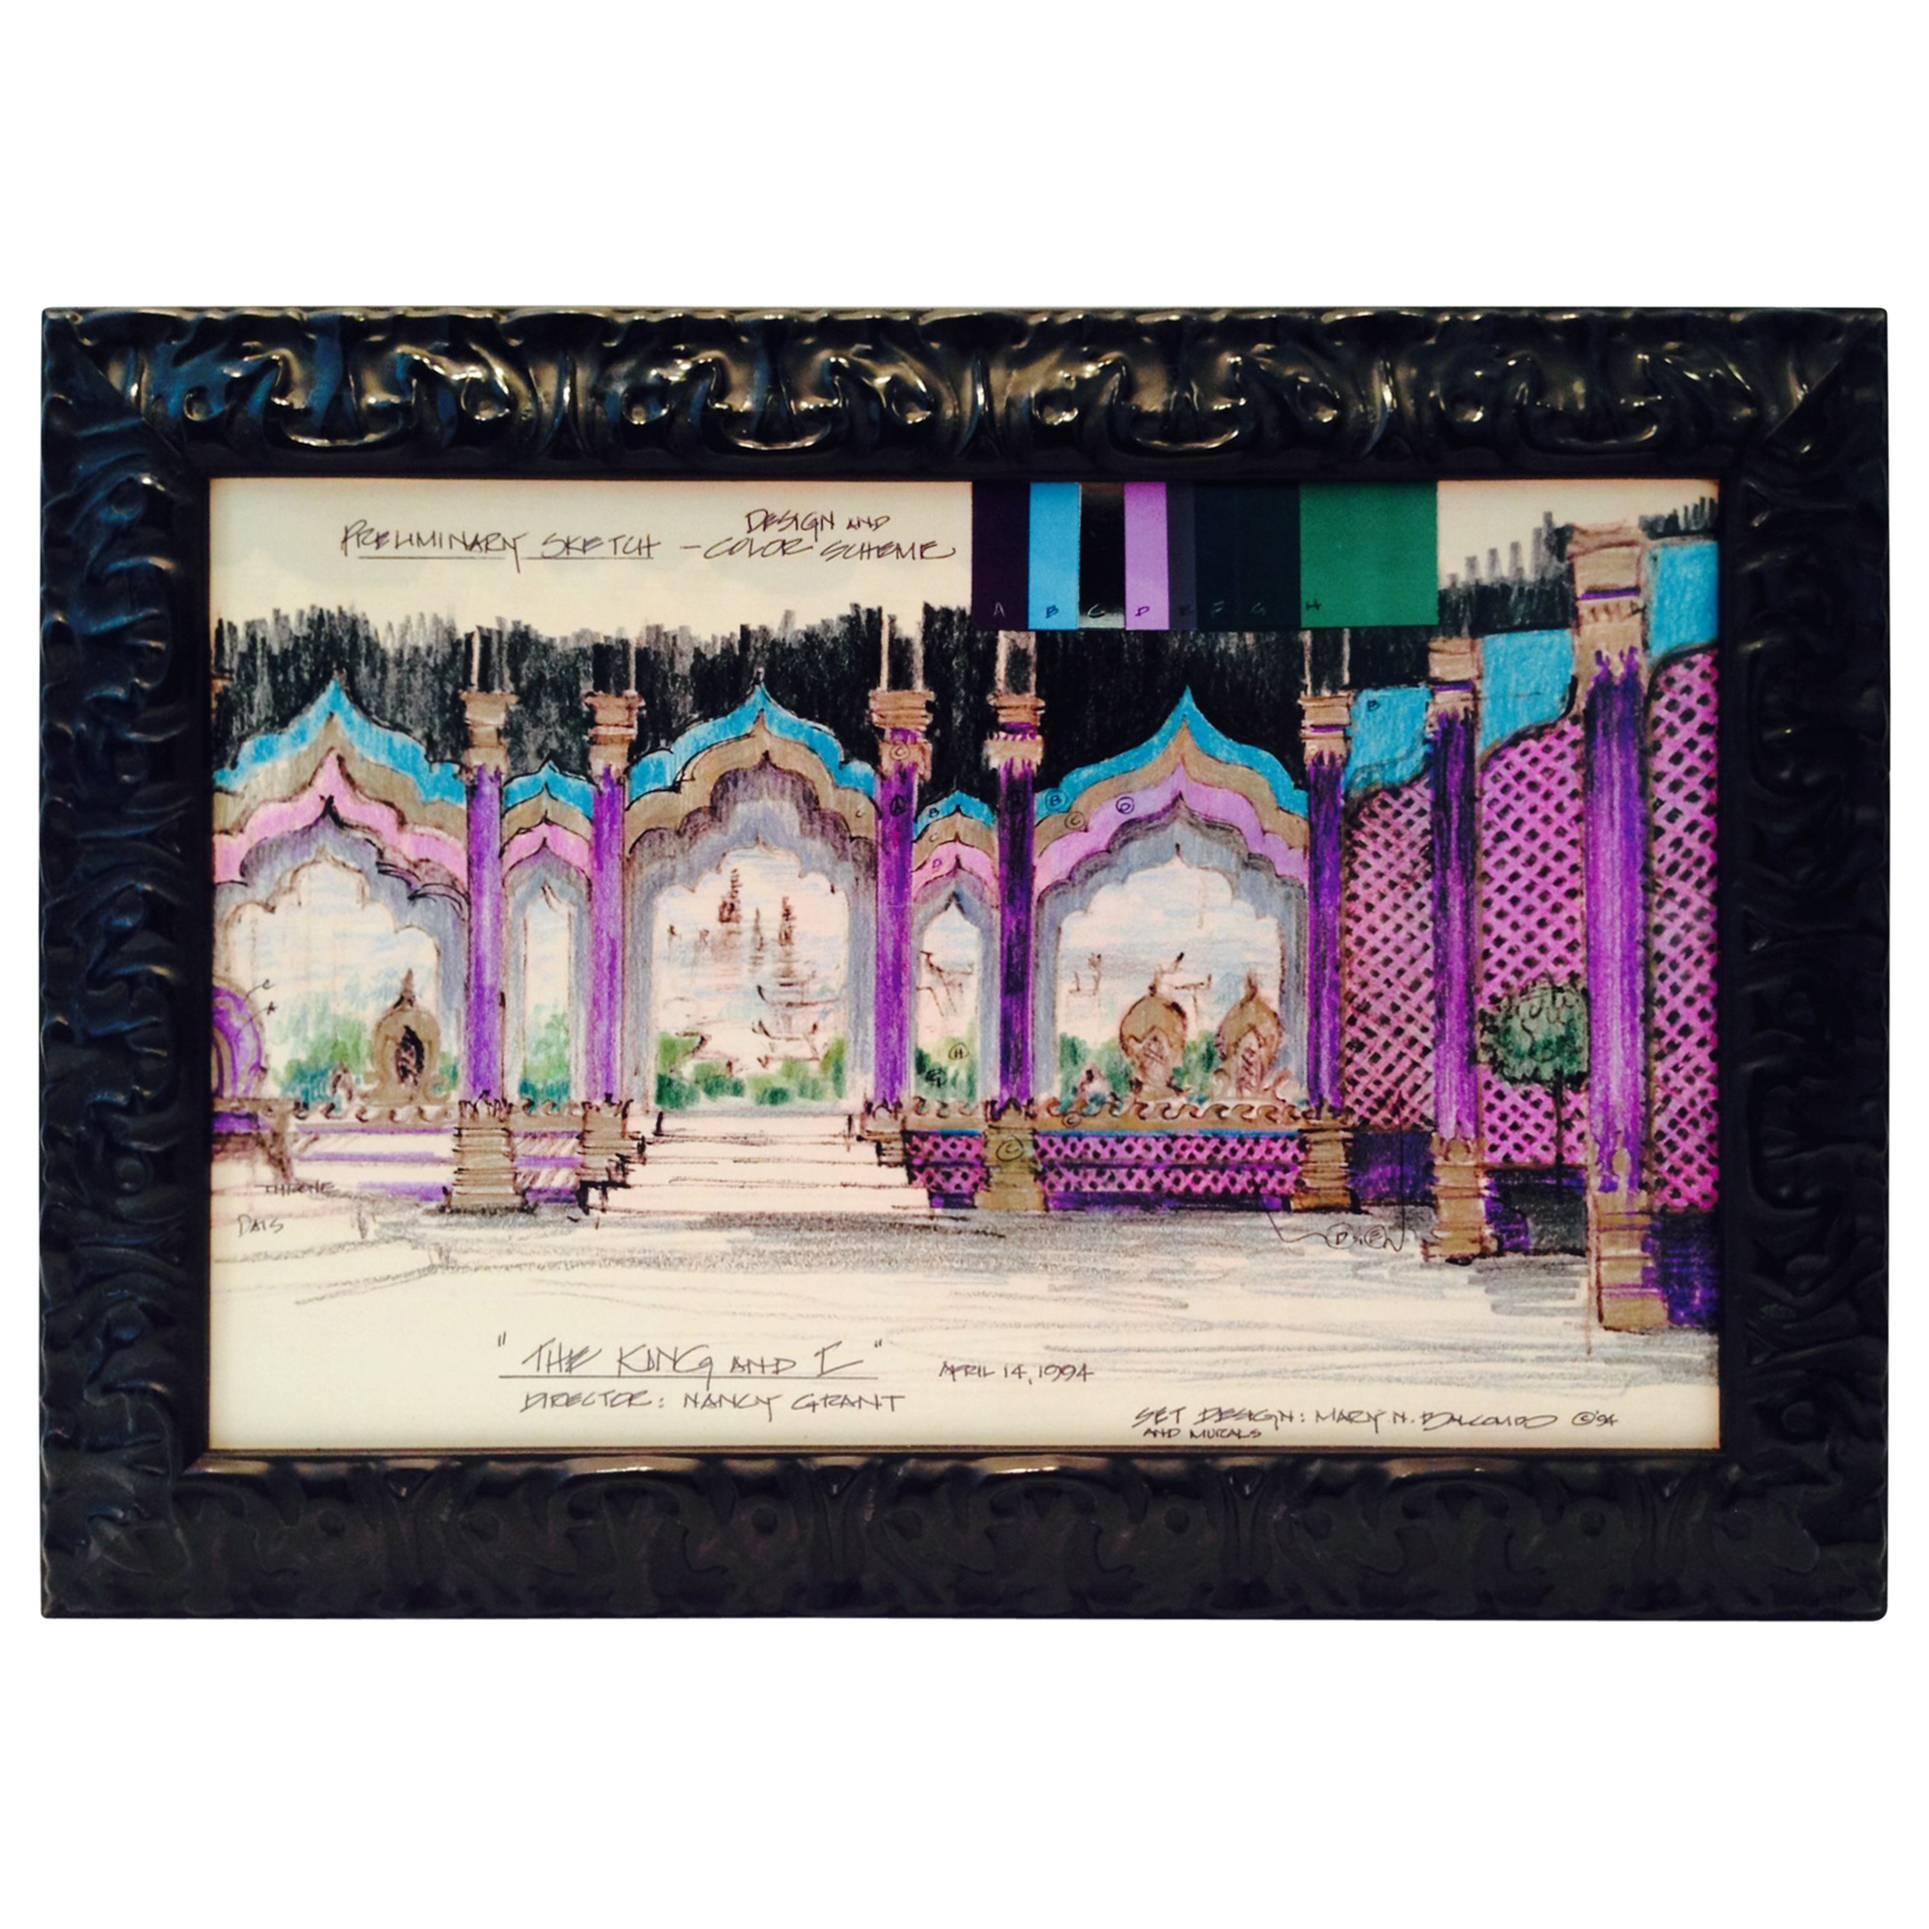 1994 Pencil Drawing Set Design "the King and I" by, Mary N. Balcomb For Sale